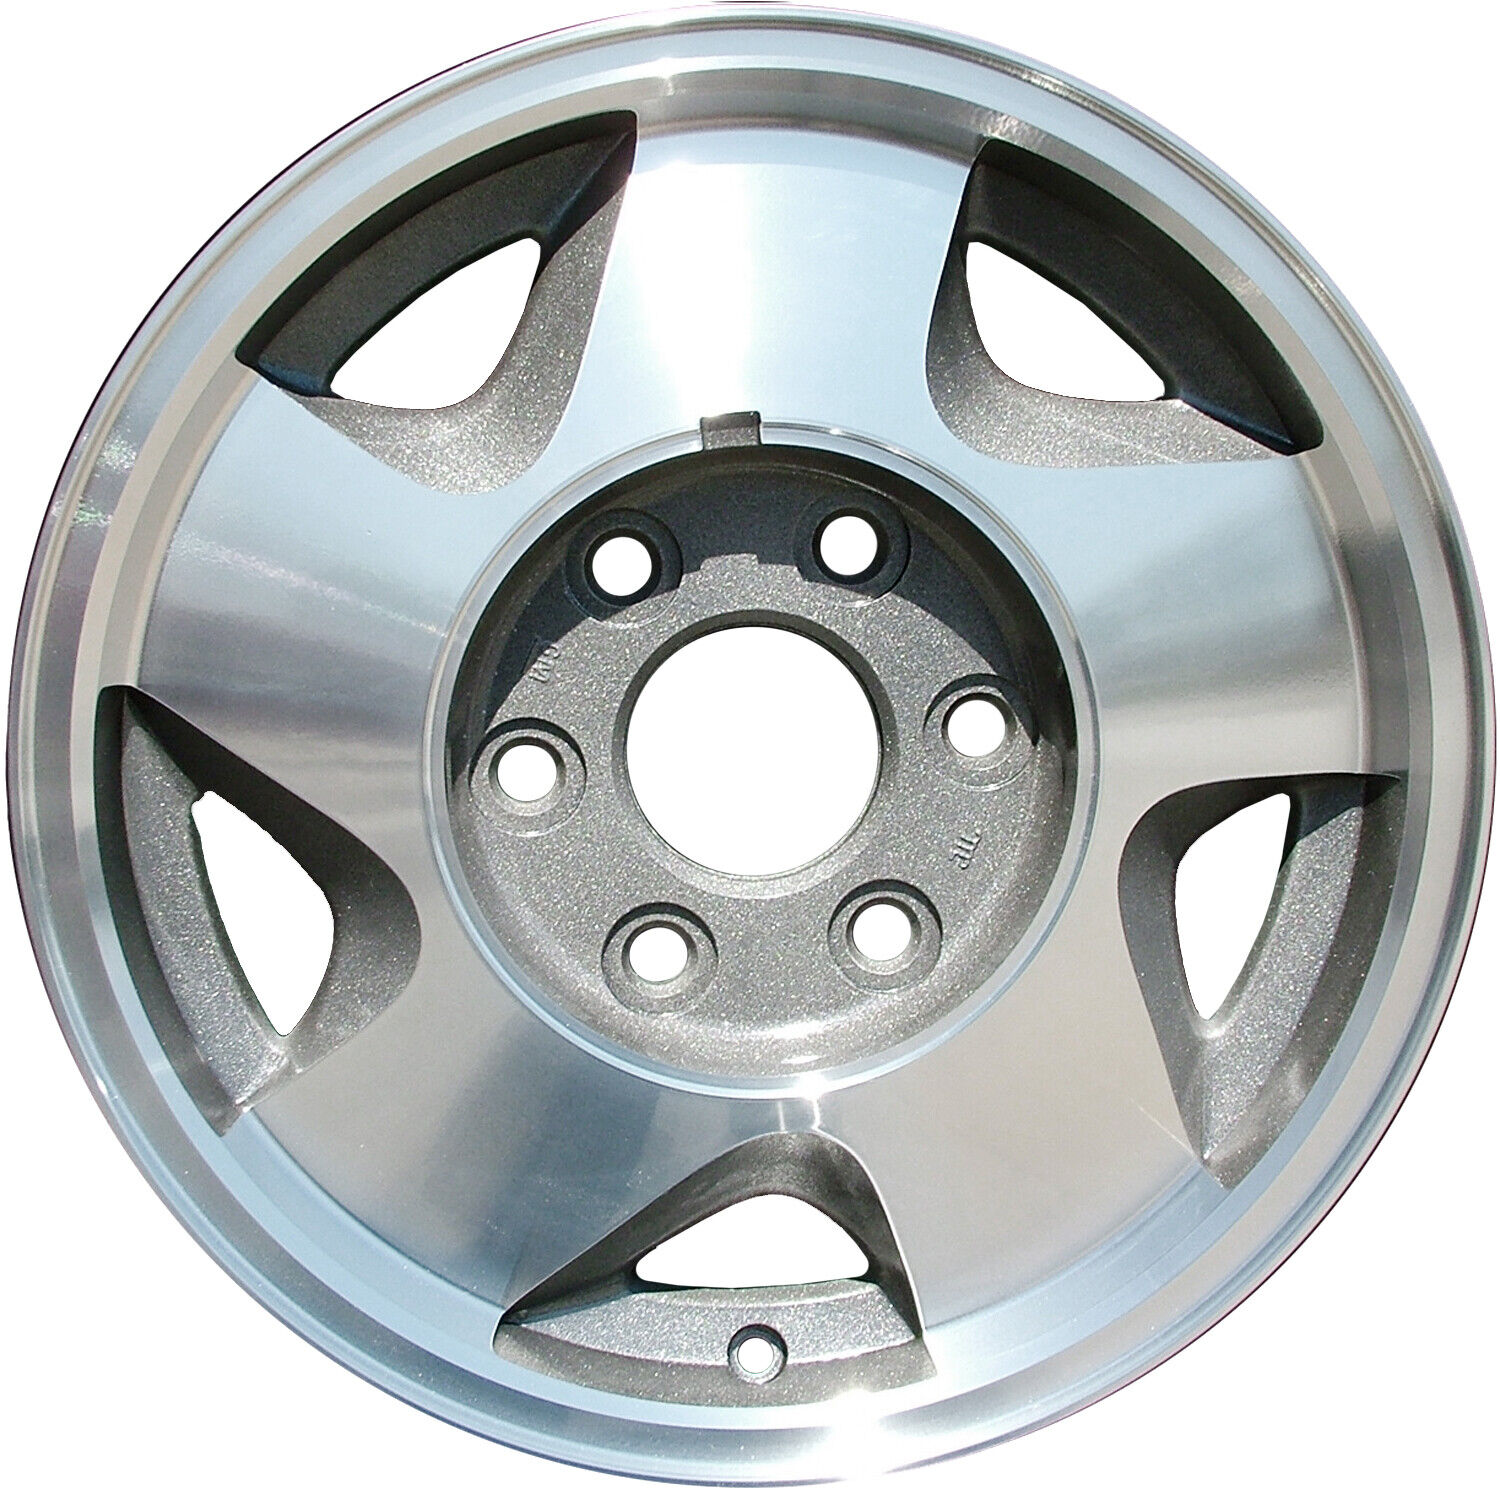 05015 OEM Reconditioned Aluminum Wheel 16x7 Charcoal Painted